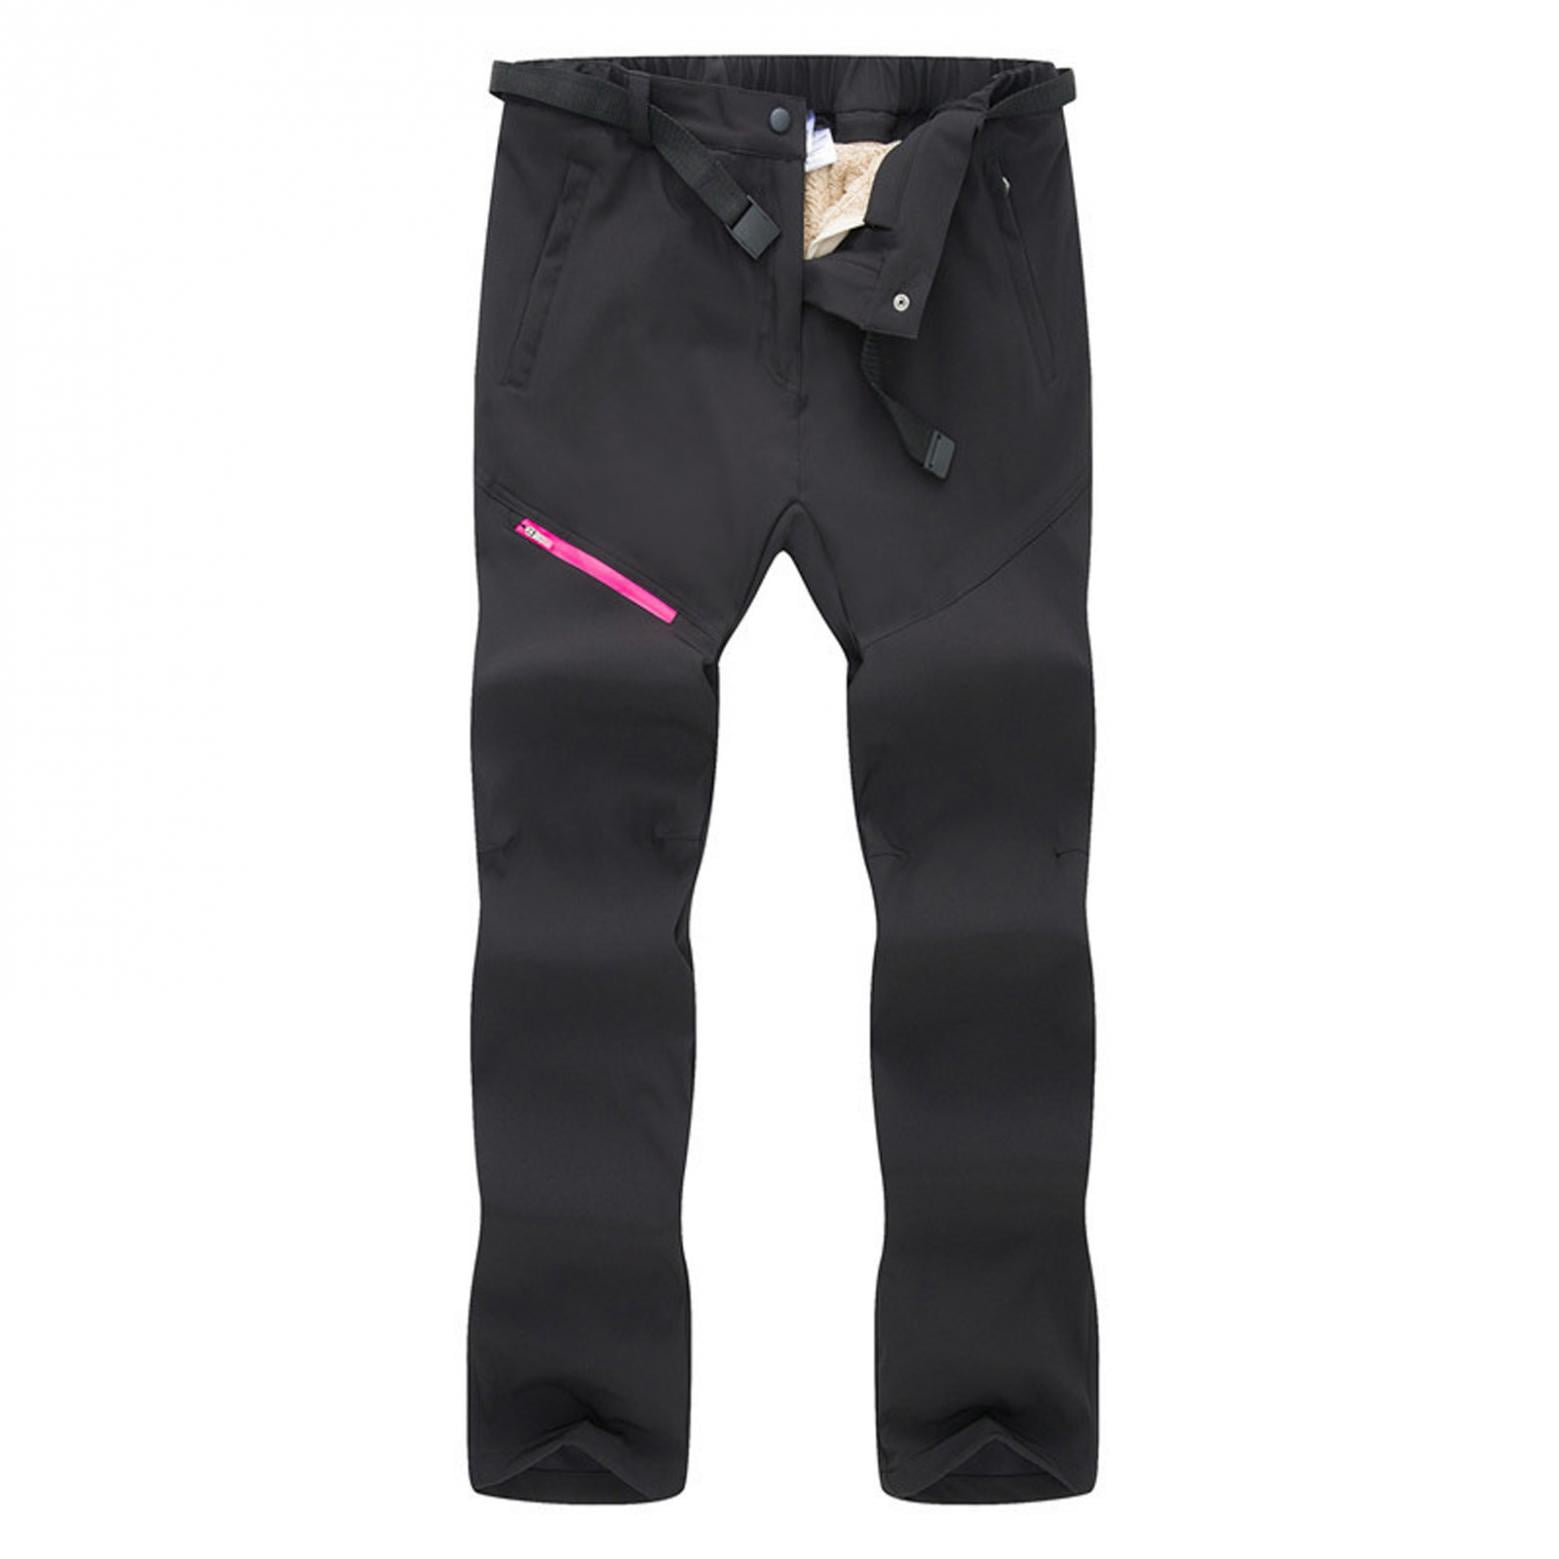 Casual Classic Ski Pants for Women, Winter Windproof Waterproof Insulated  Snow Pants Thicken Fleece Lined Hiking Pant